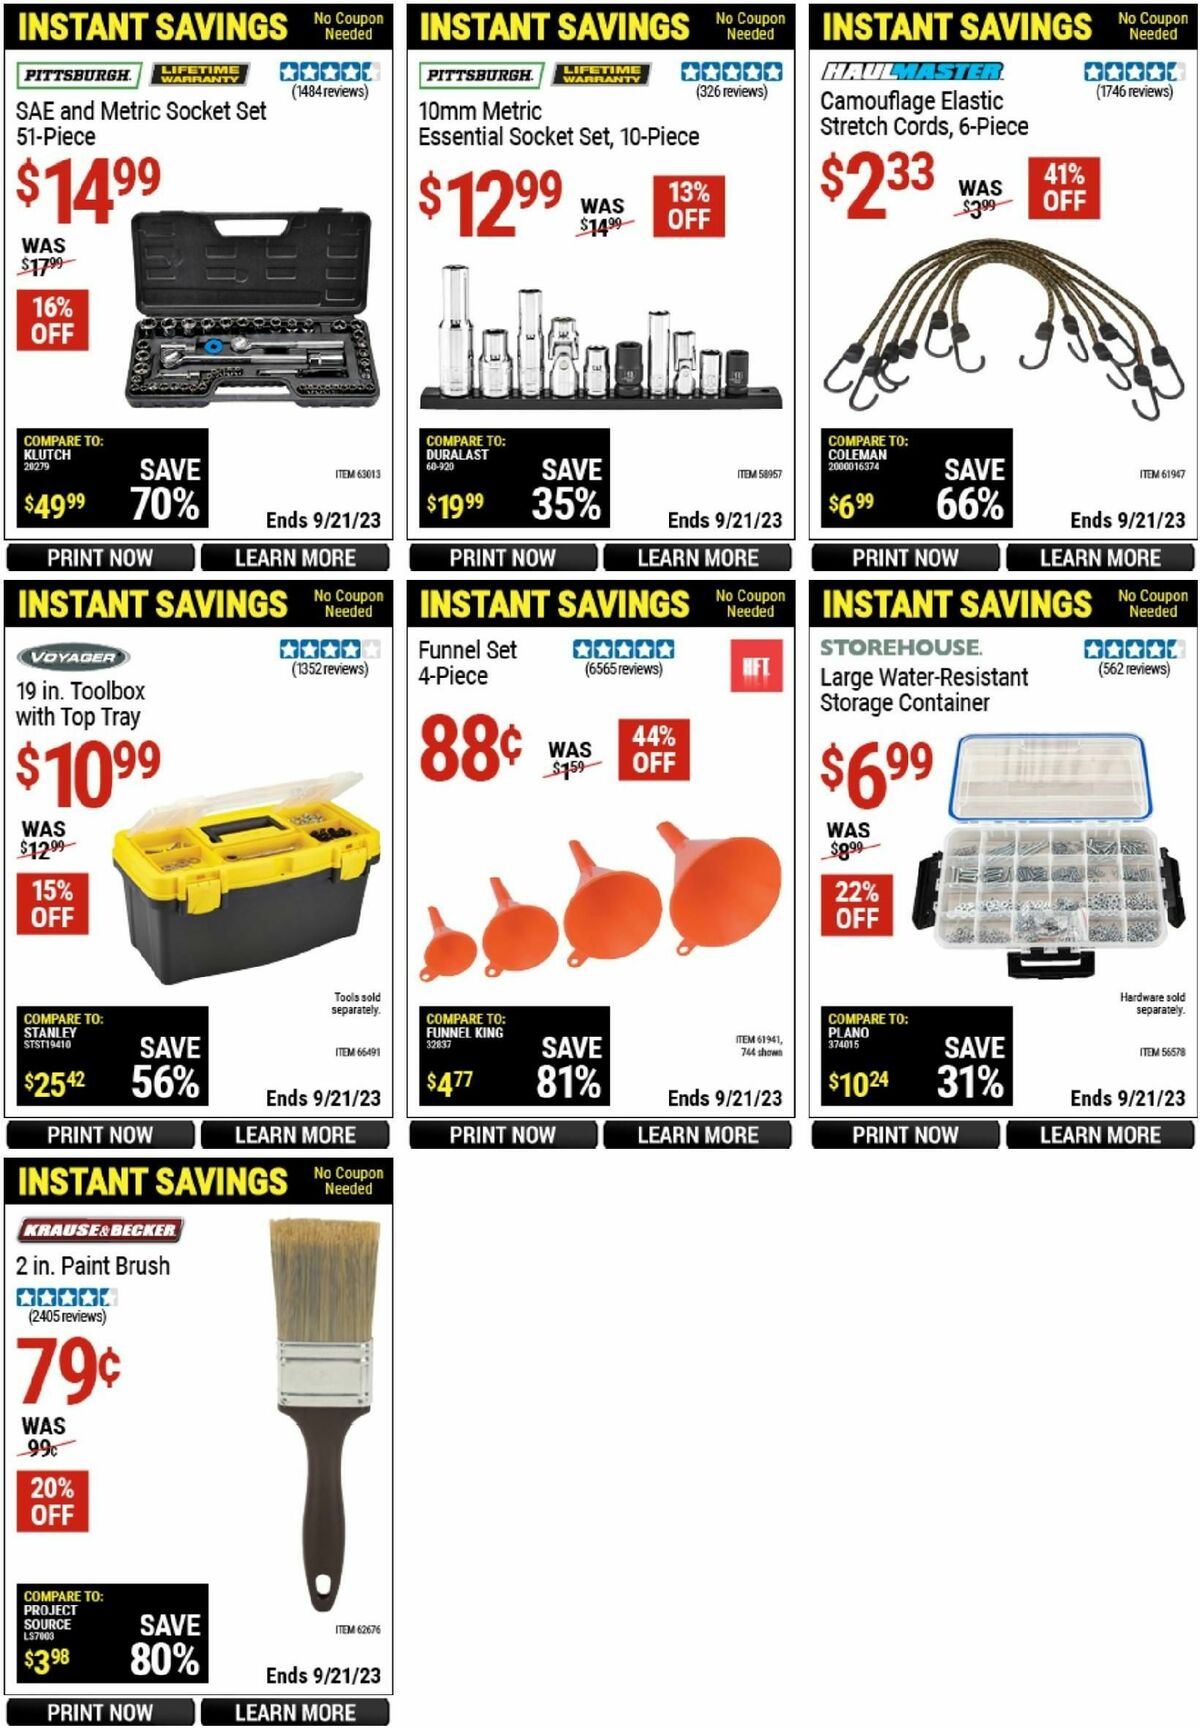 Harbor Freight Tools Instant Savings Weekly Ad from August 21